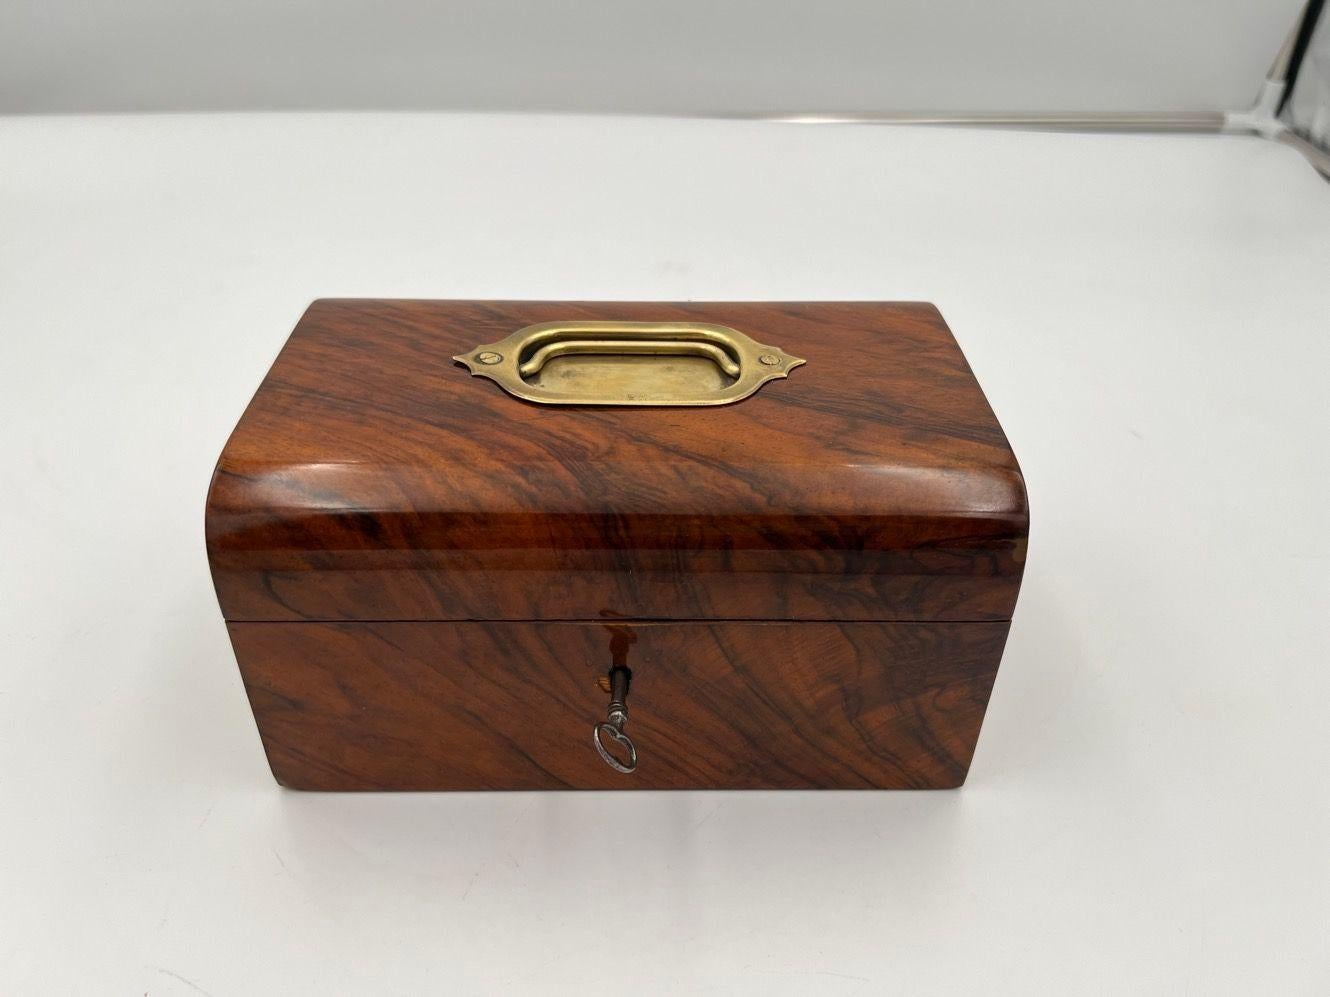 Small Biedermeier decorative box, walnut veneer, southern Germany around 1850.
Brass fitting with handle. Restored and shellac hand polished.
Dimensions: H 10.2cm x W 20cm x D 13.5cm.